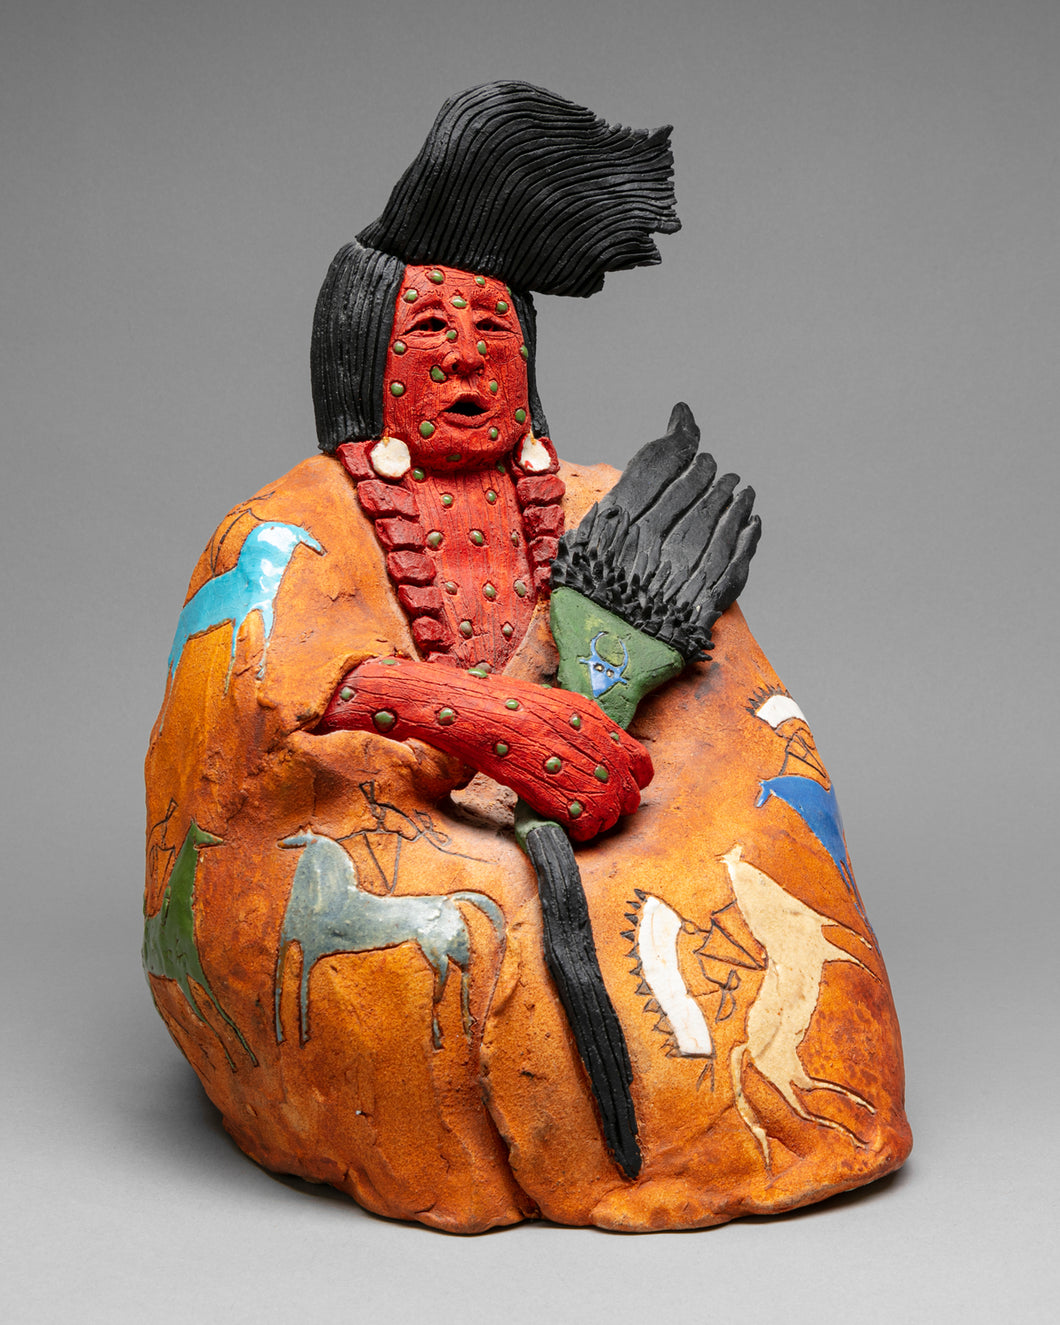 Eagle Man, 1986 by Glen LaFontaine, Chippewa and Cree Nation